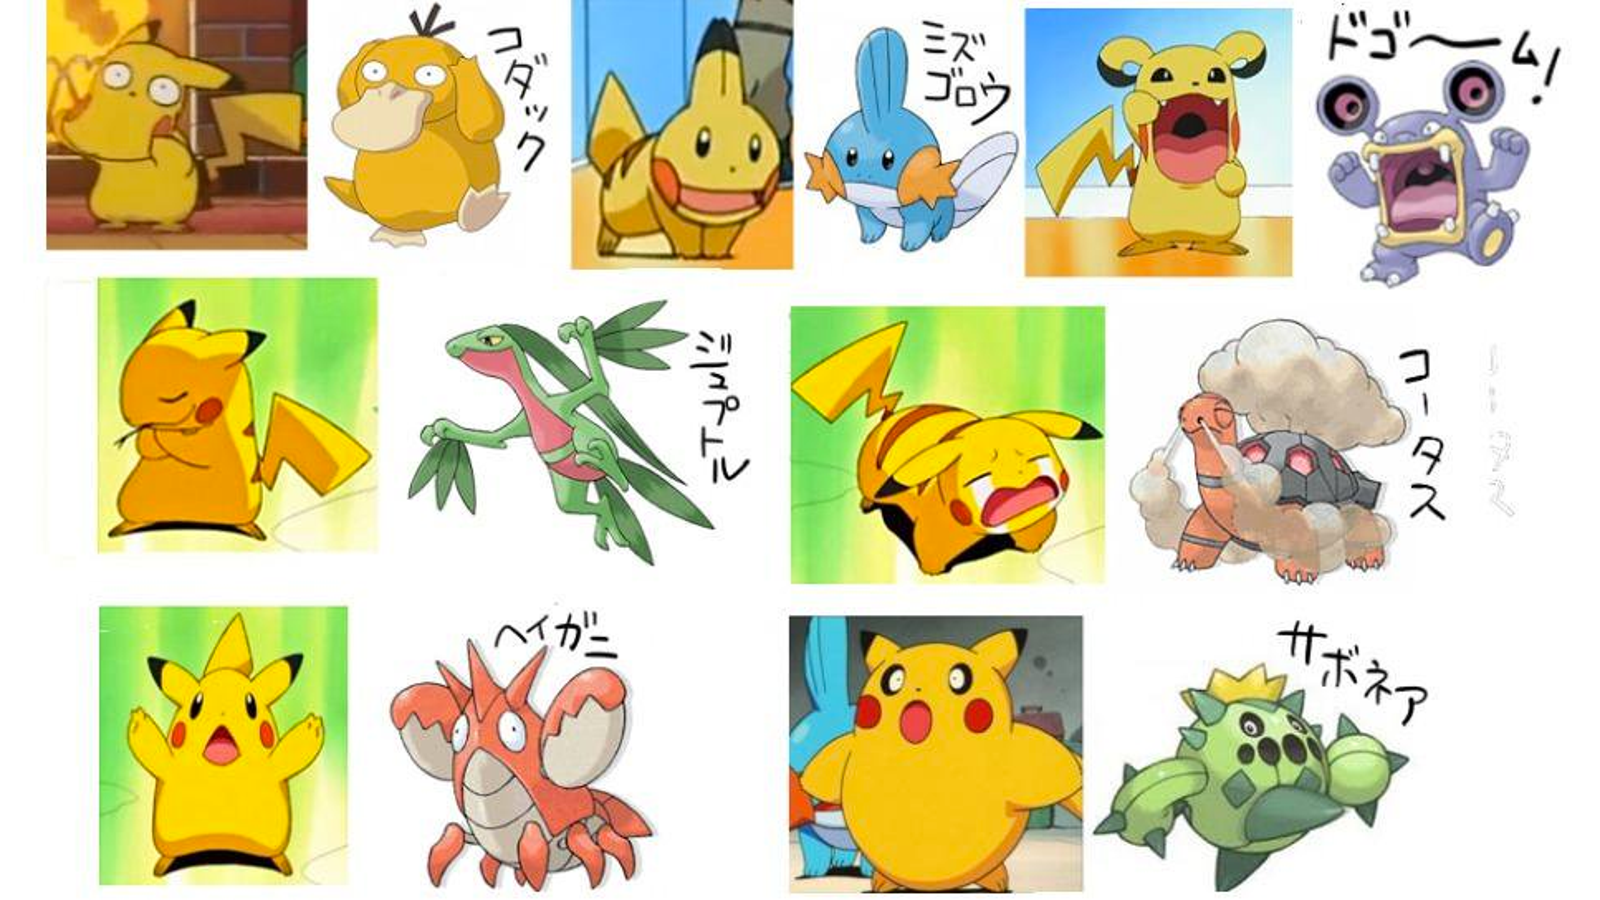 Pikachu Is Great at Impersonating Other Pokémon Characters1600 x 900